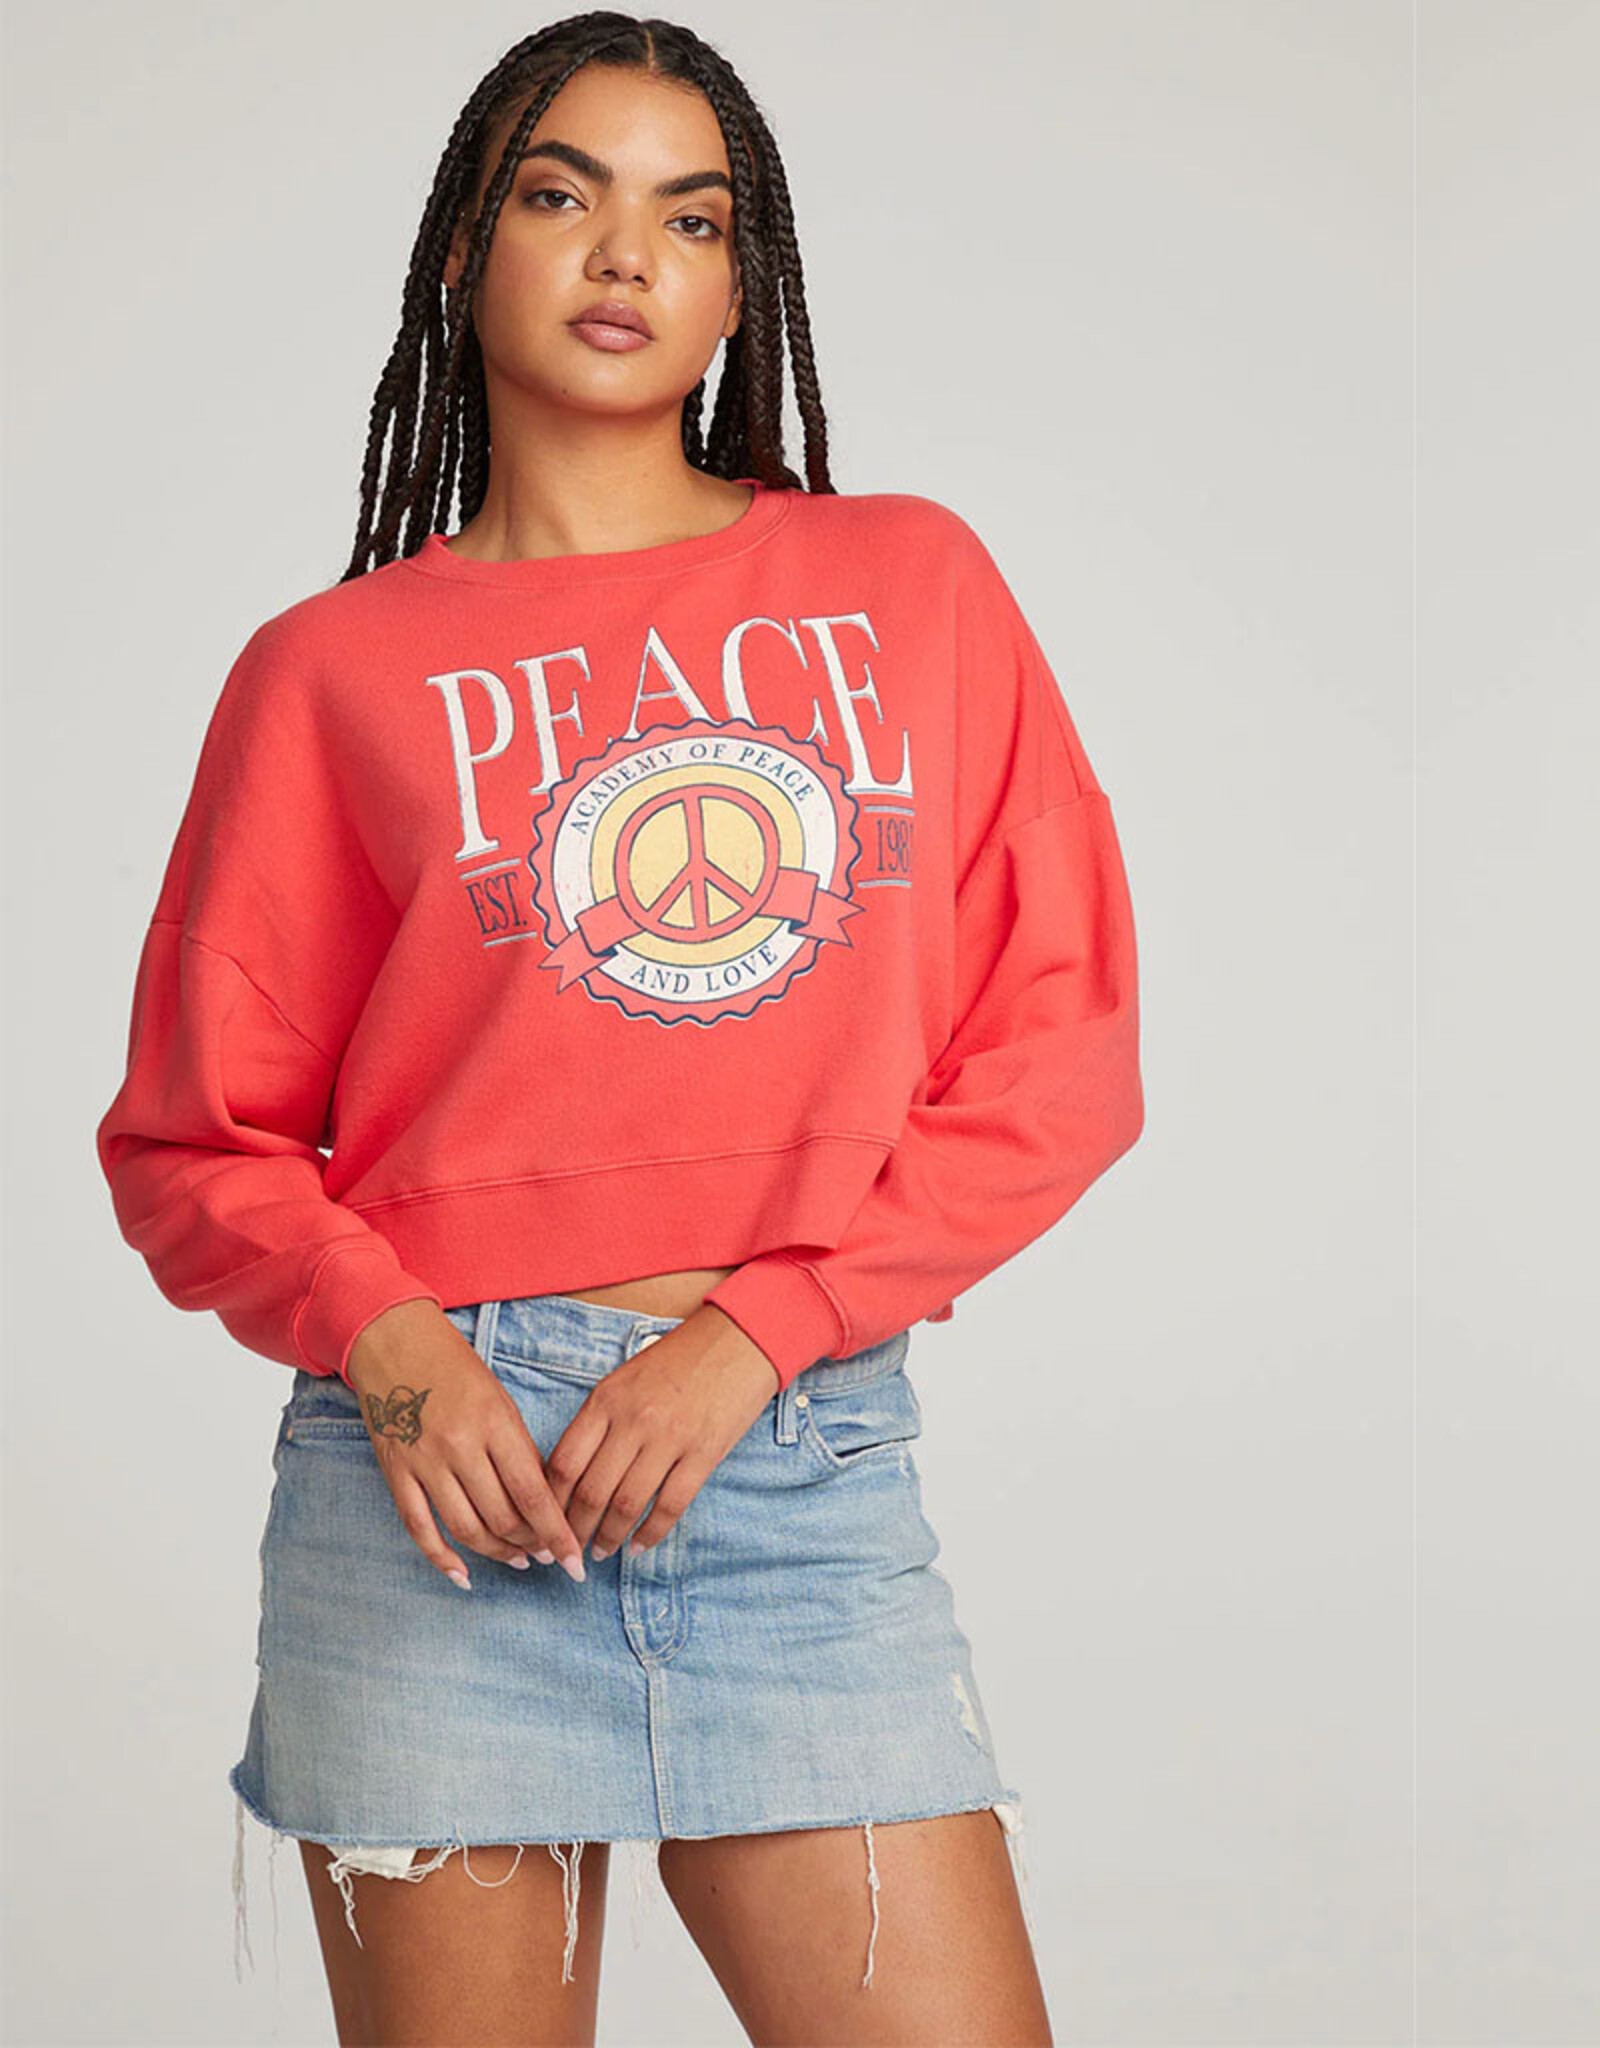 CHASER RAMONE PULLOVER PEACE ACADEMY